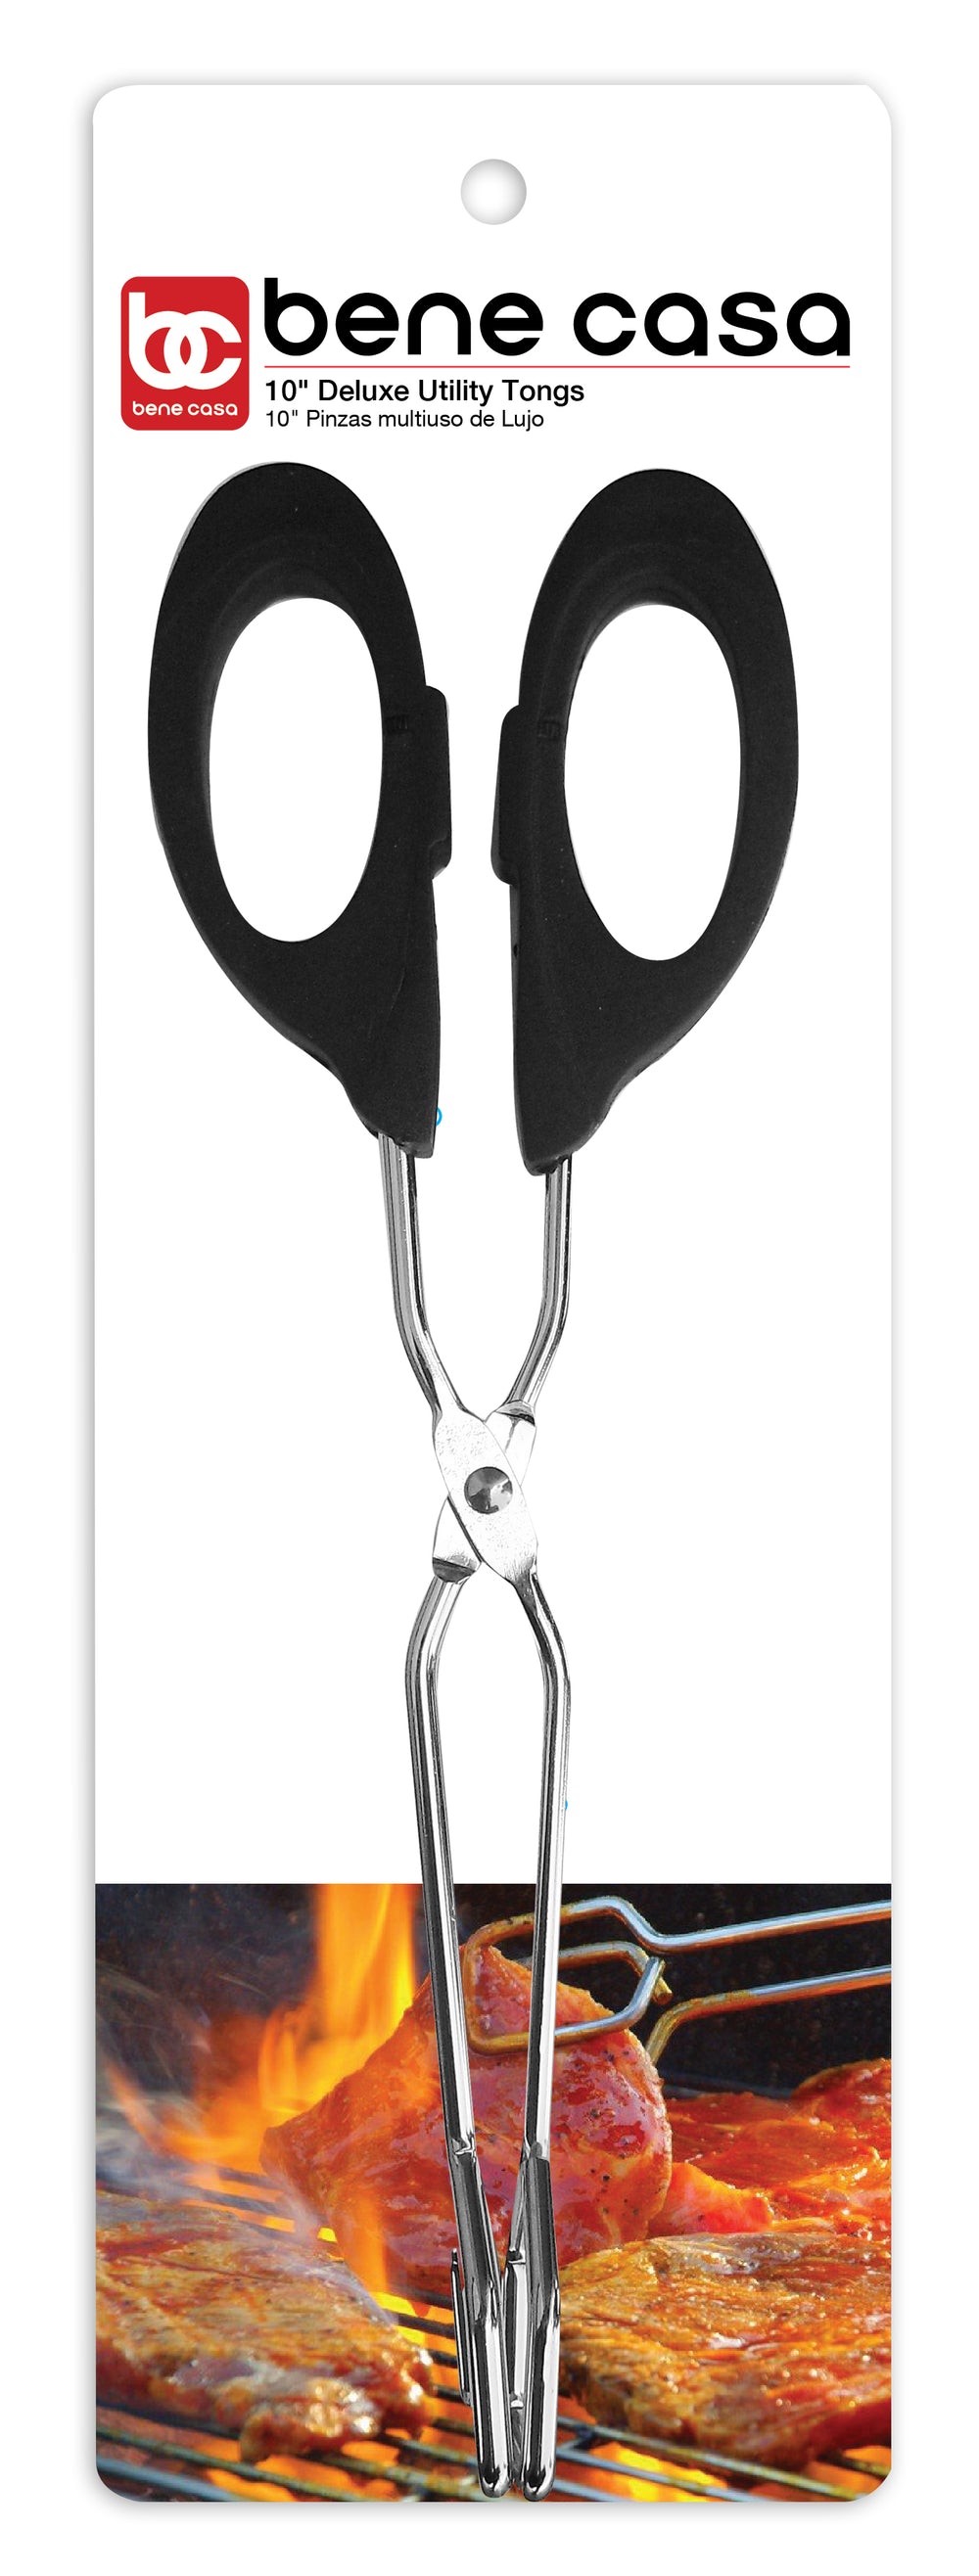 Bene Casa 10-inch metal tong, wide tip tong, heat-resistant handle, scissor type tong, anti-slip grip tong, easy to use tong for BBQ